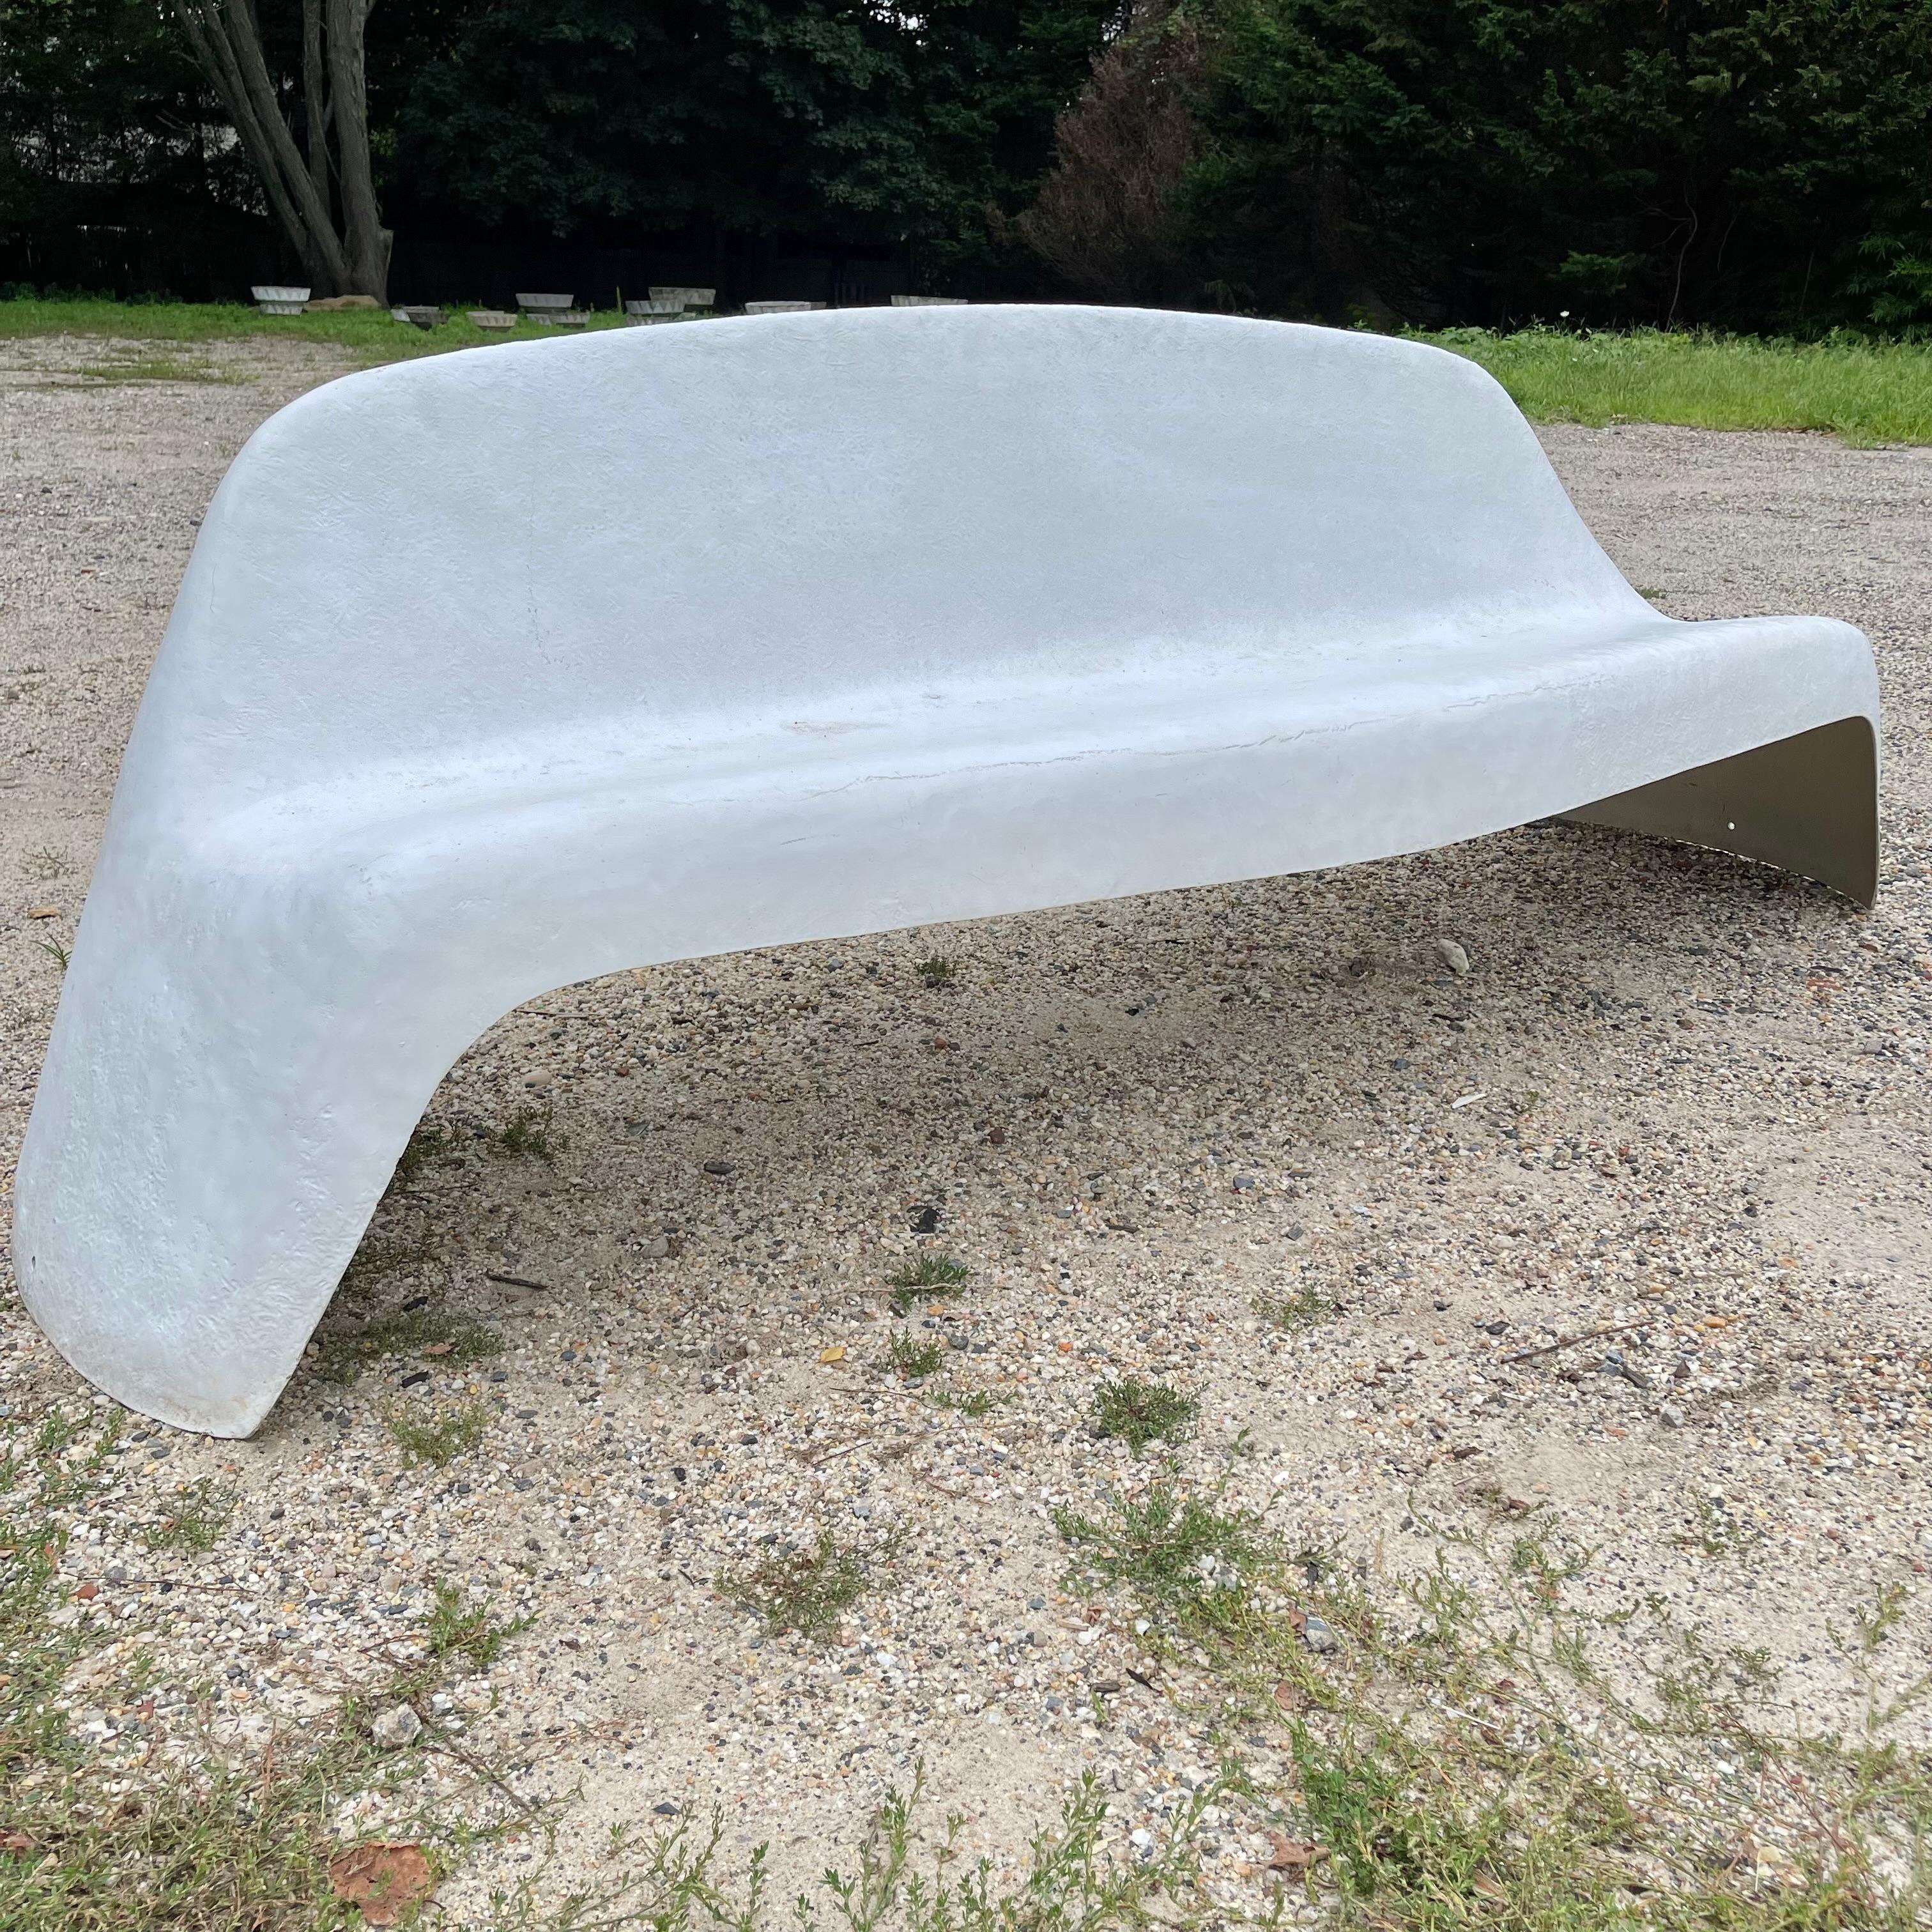 Stunning sculptural fiberglass bench by Walter Papst for Wilkhahn. Made in West Germany, in the 1960s. Beautiful and simplistic design. Single piece of fiberglass sculpted with great lines from all angles. Made for the outdoors but also looks great